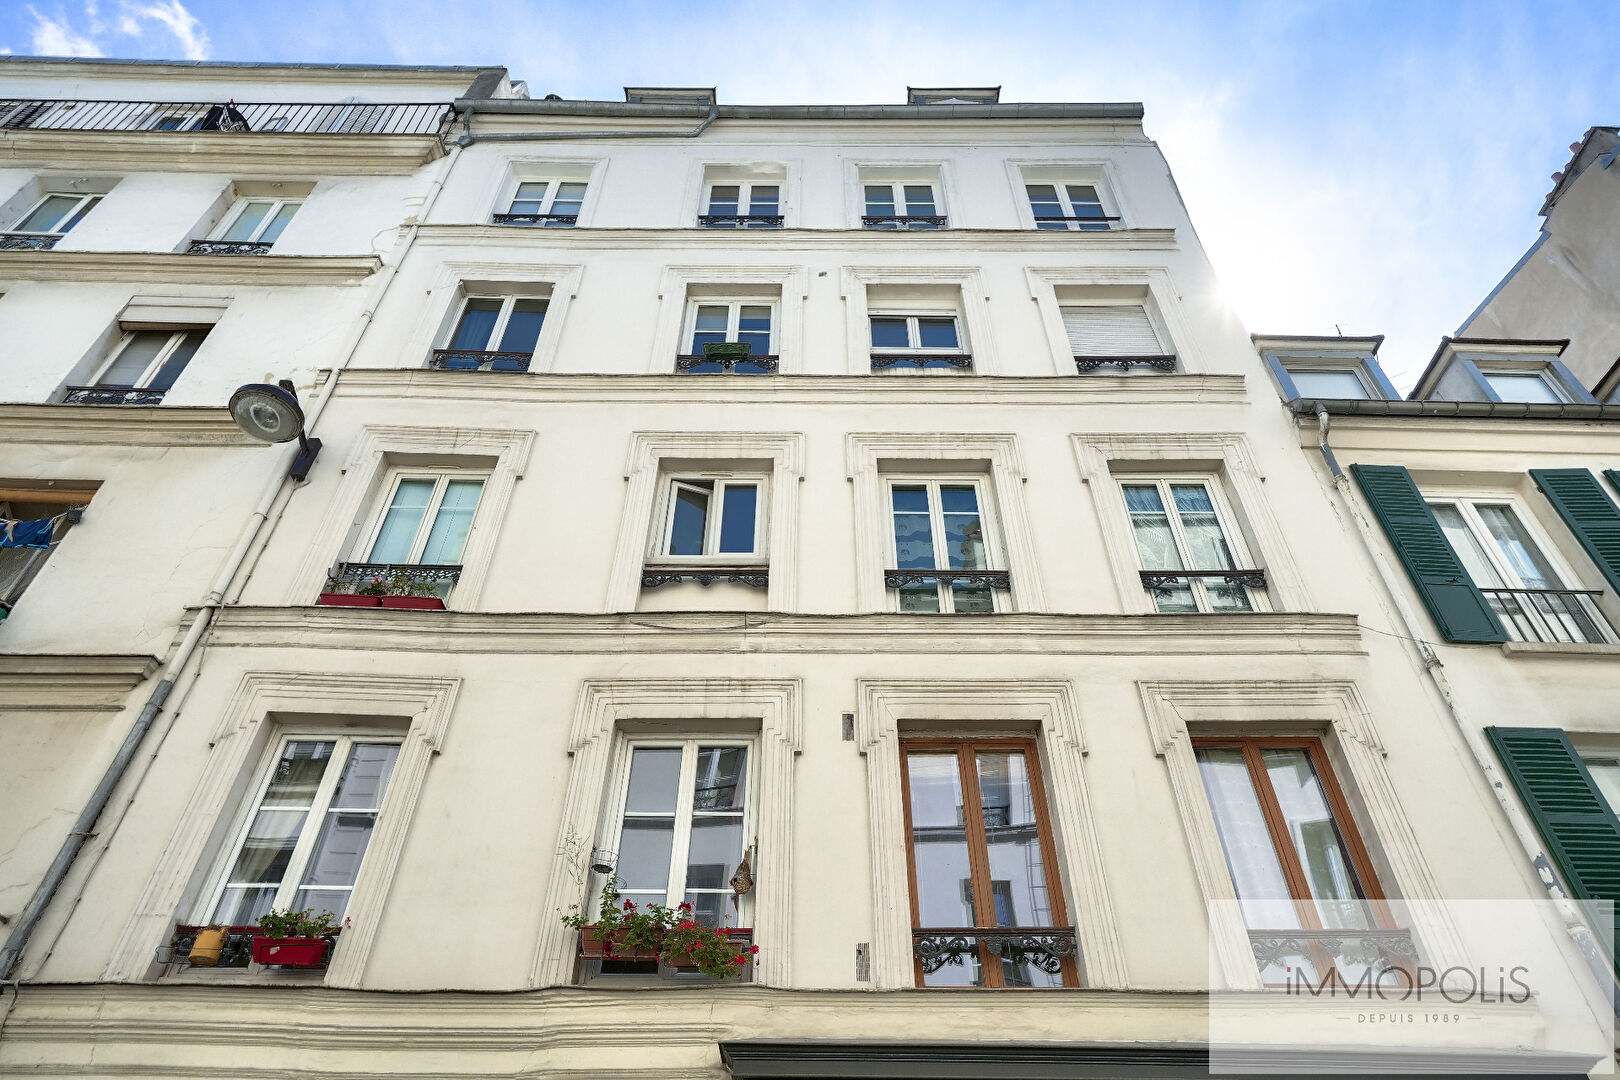 Beautiful studio in good condition well placed in Montmartre with a good DPE: e 9